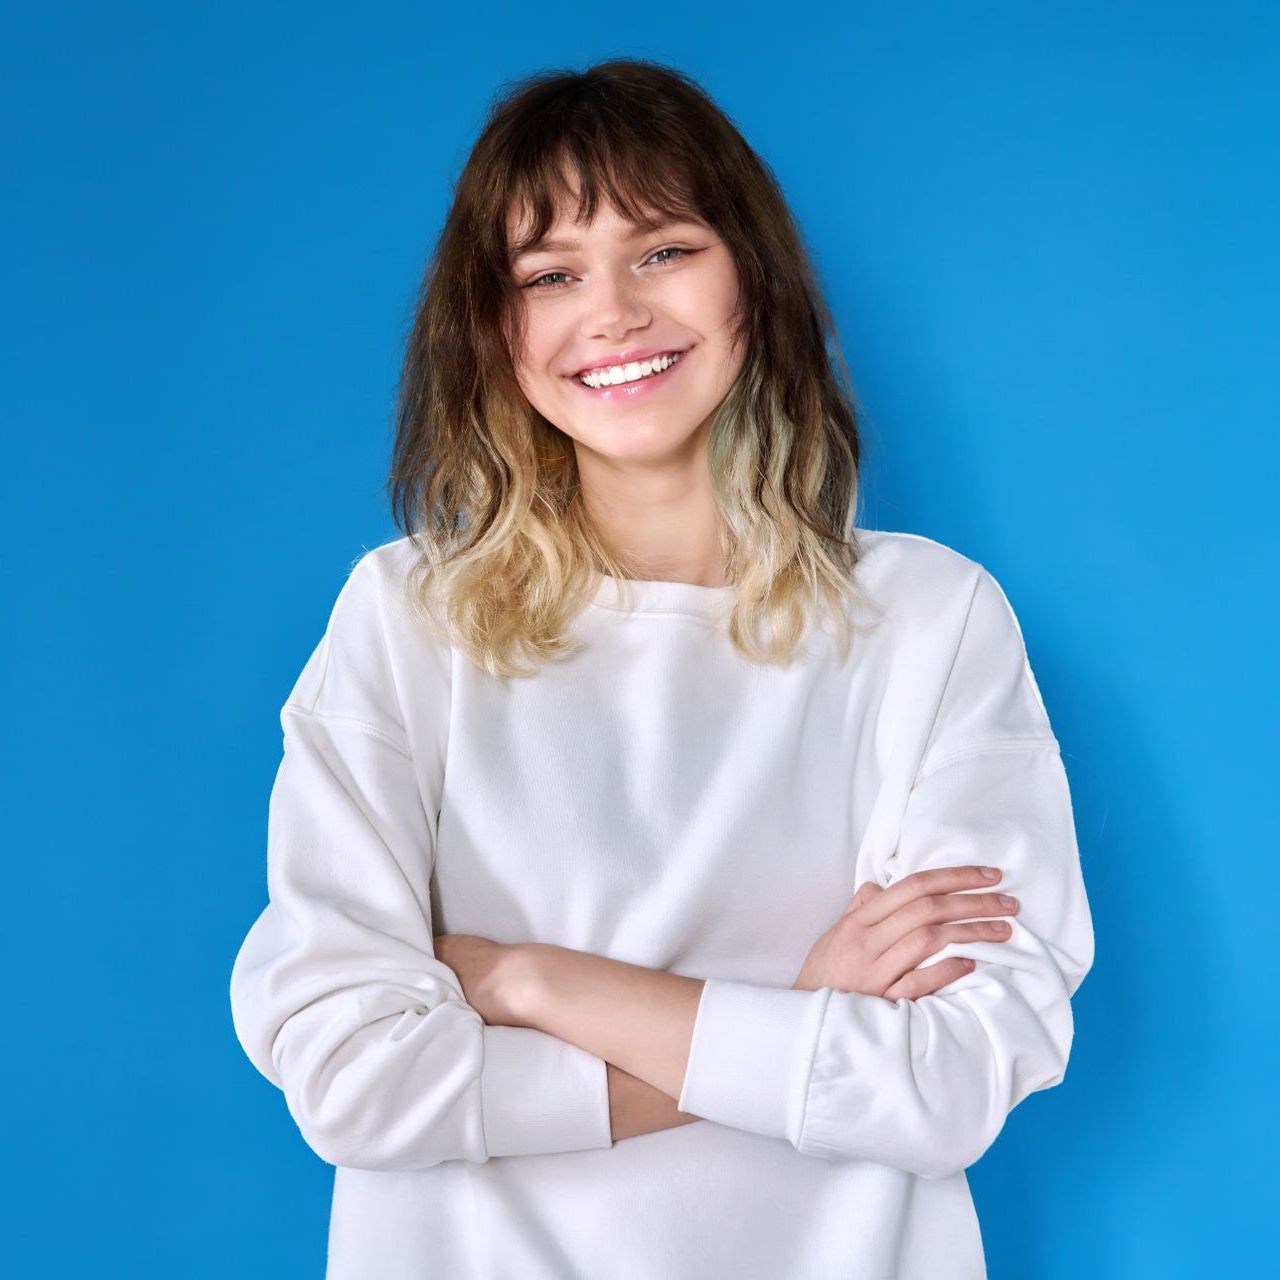 teenage girl smiling with blue background